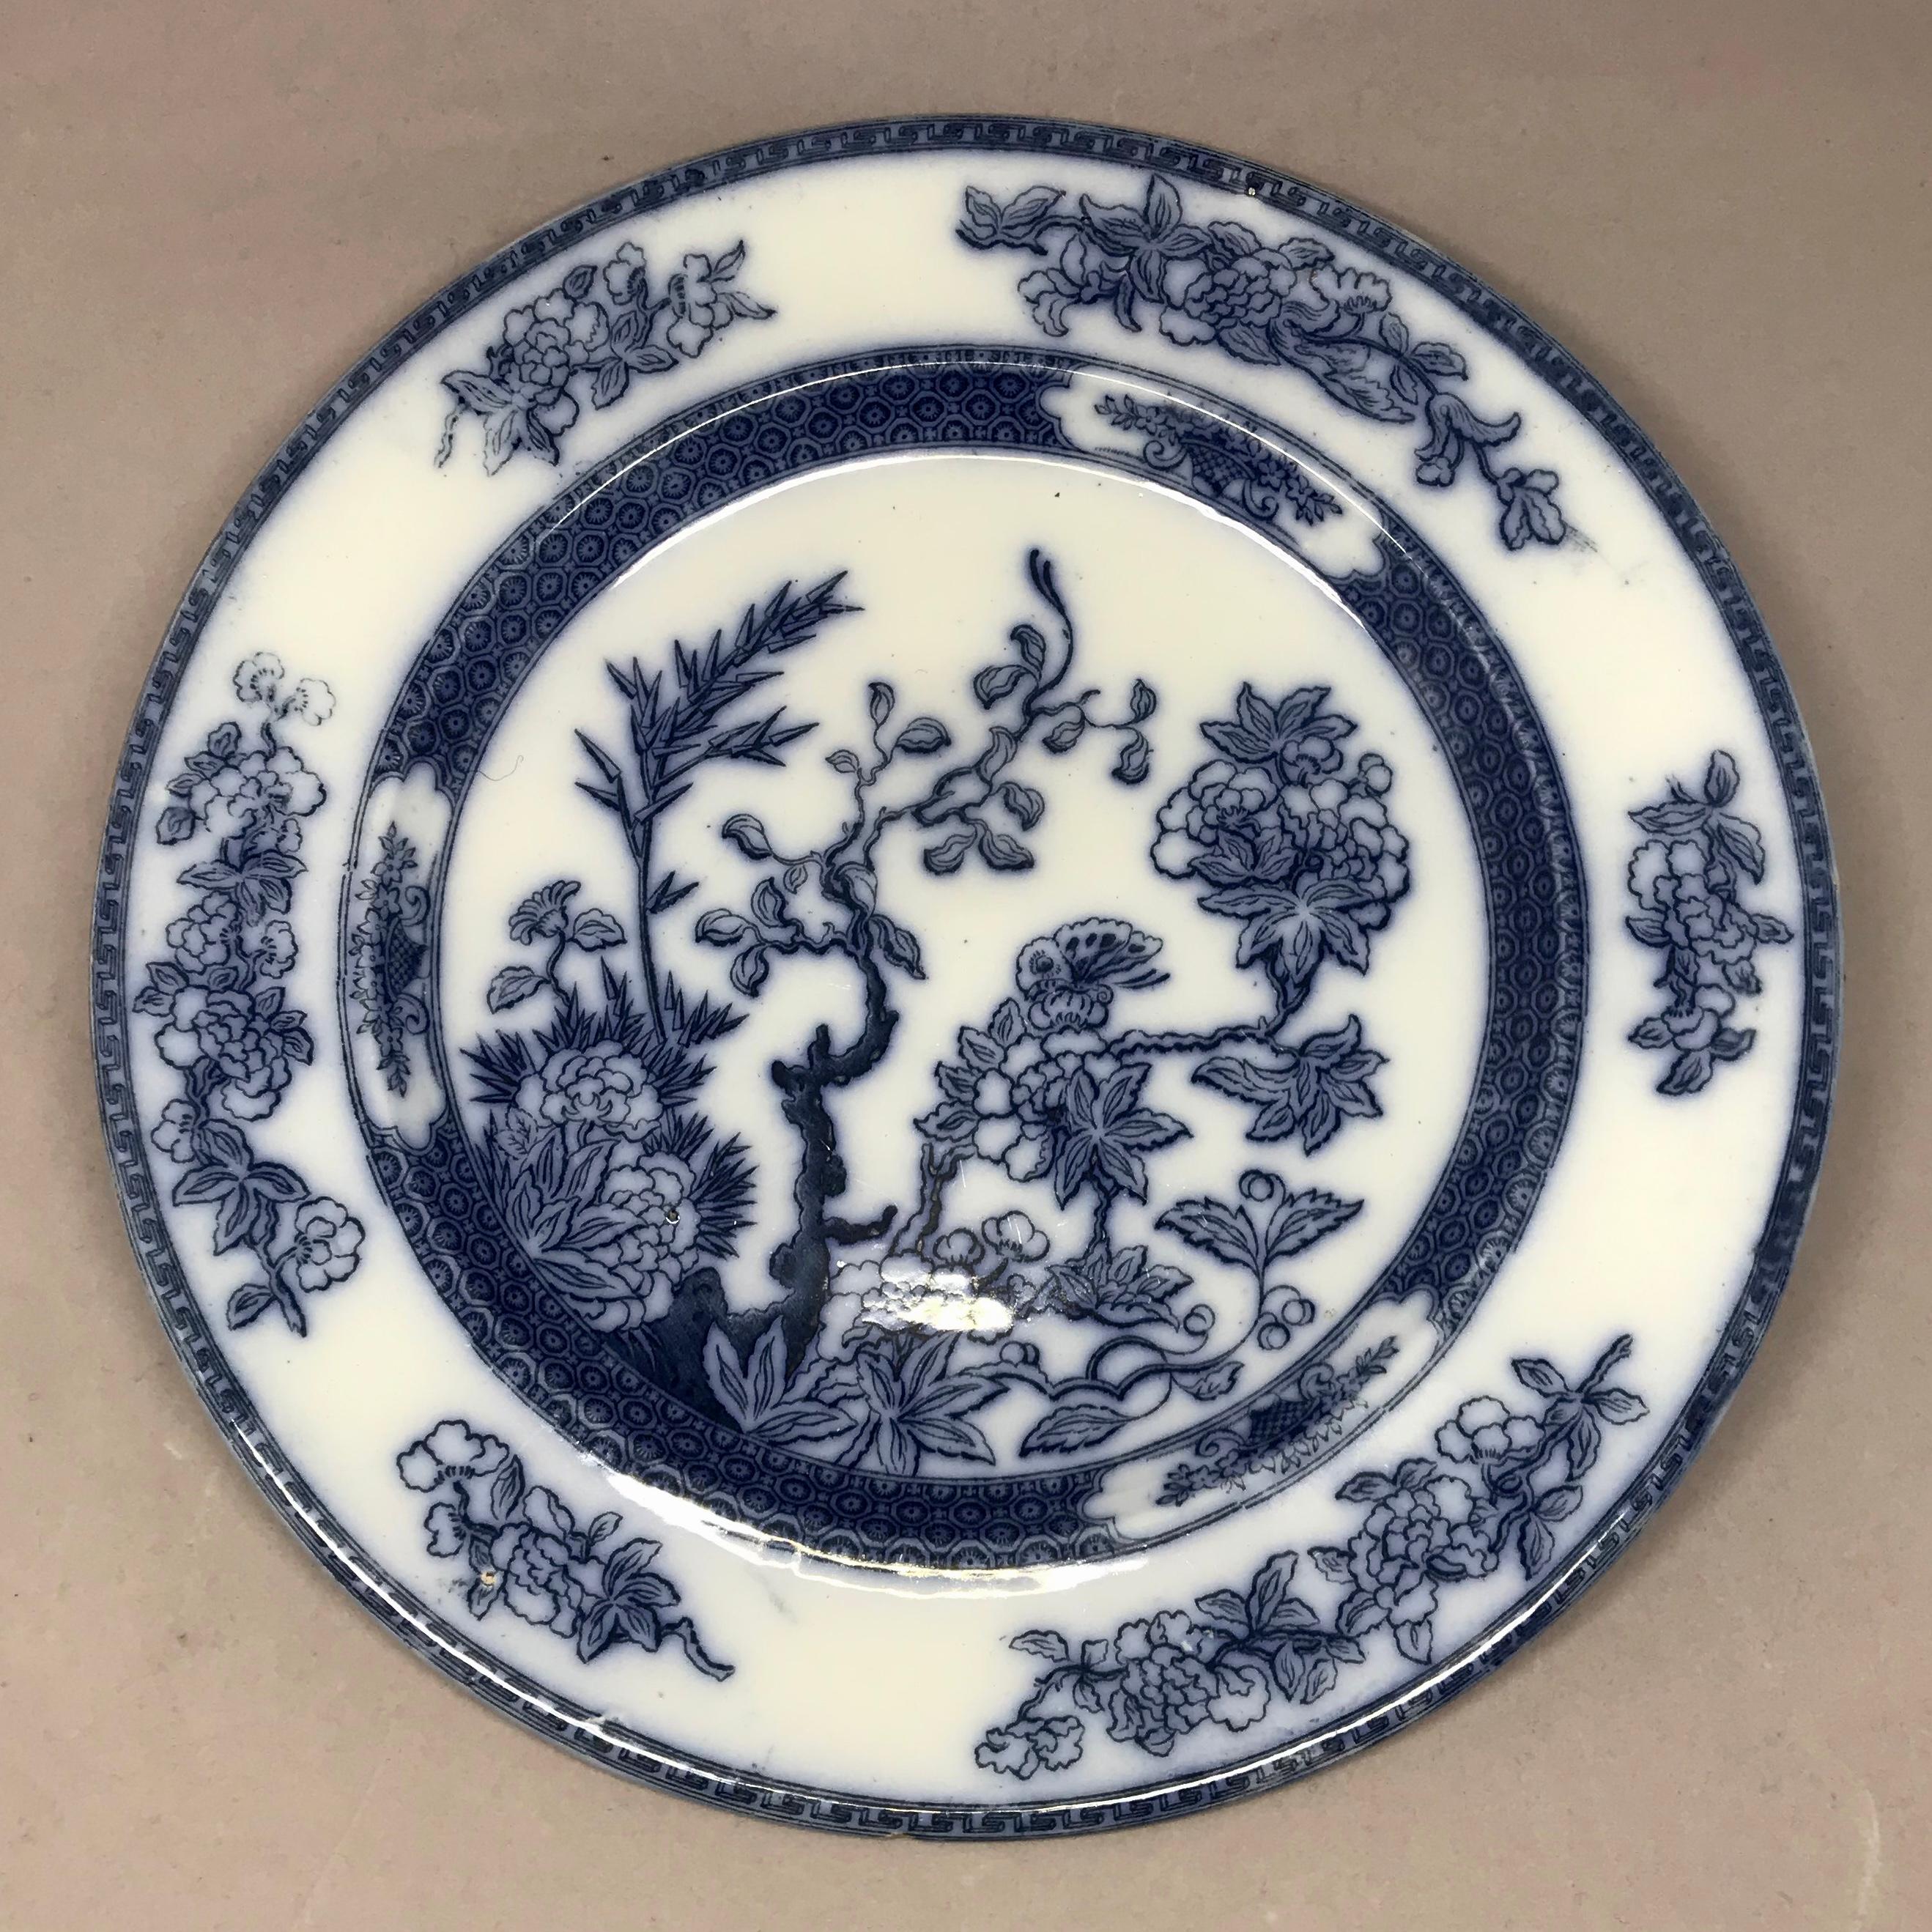 Set of three large blue and white Copeland Indian tree plates. Set of three, in unusual blue and white model of this pattern in a hard
glaze durable china made for the Middle Eastern market. Back is impress marked for Copeland with 